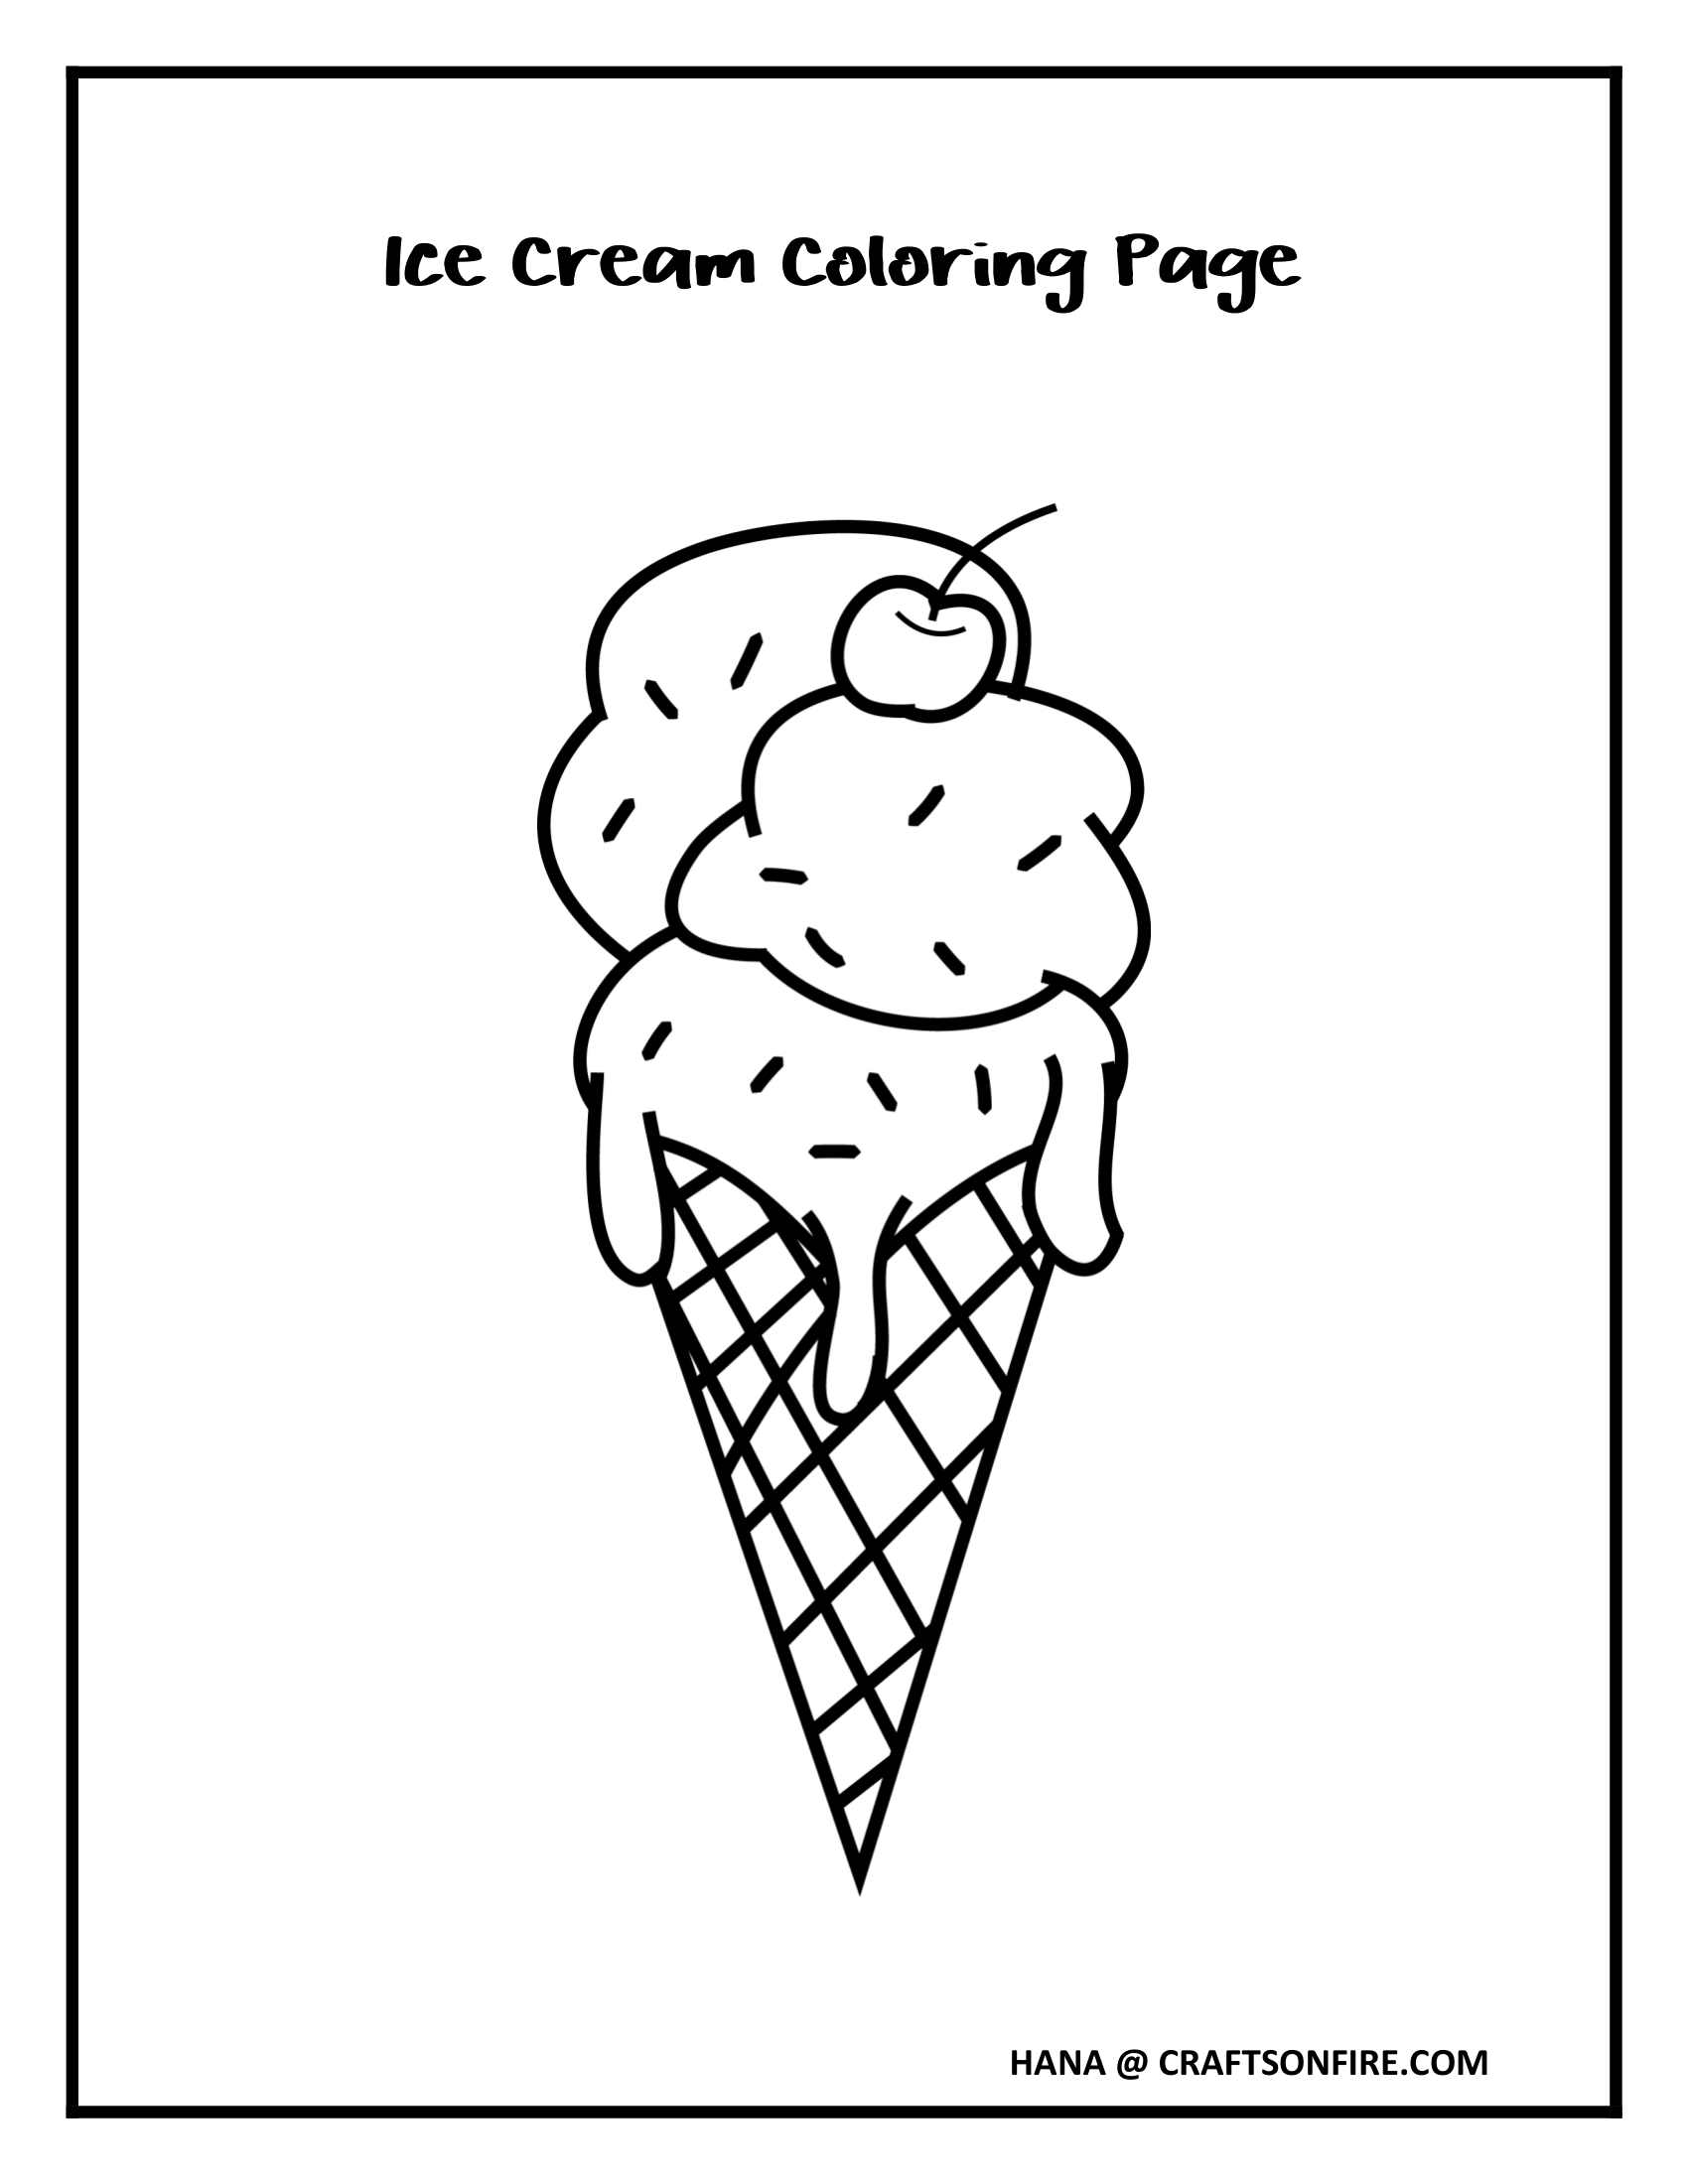 Free Ice Cream Coloring Page